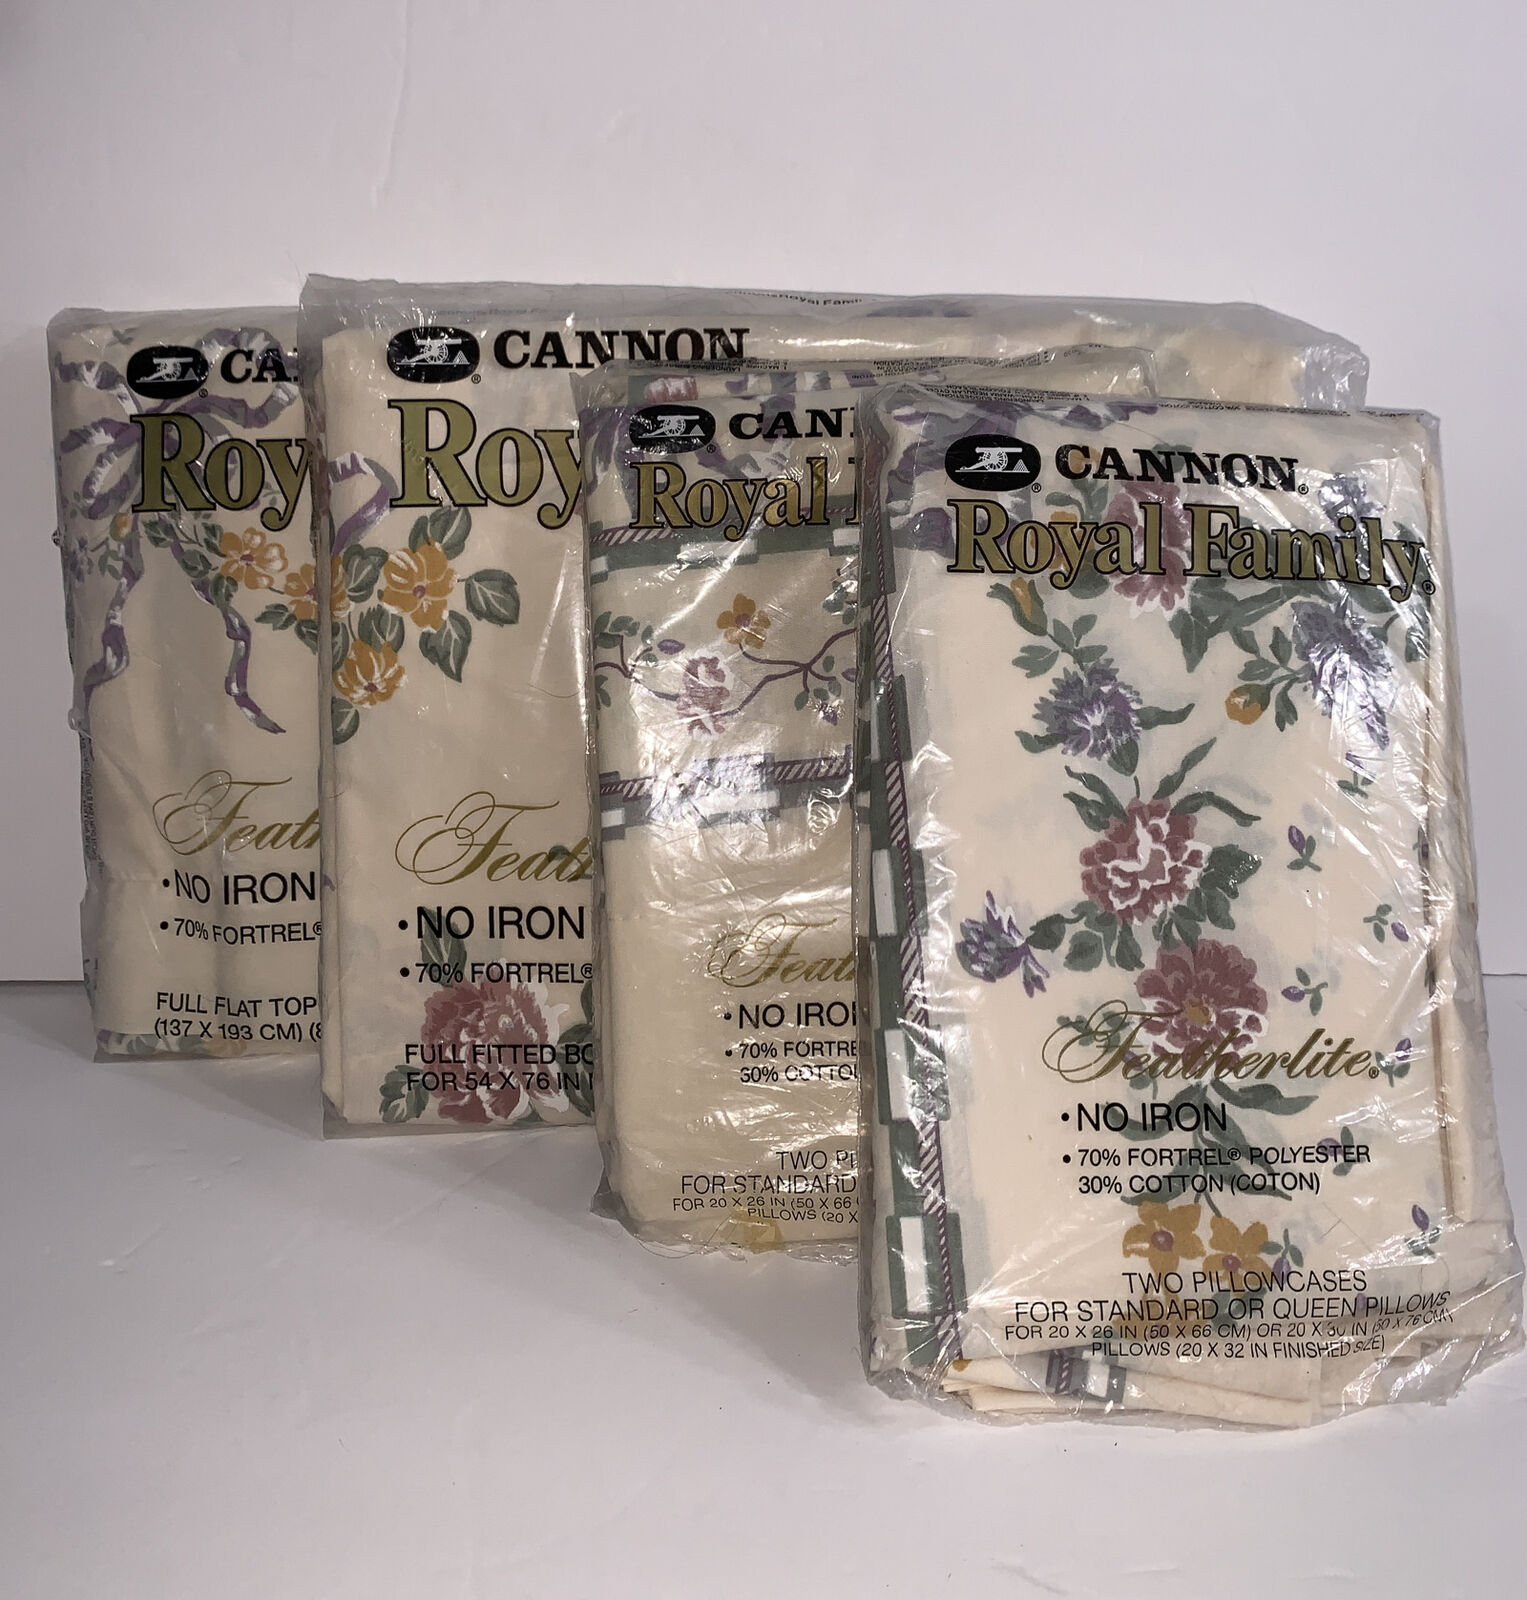 VTG NOS Cannon Royal Family Featherlite Bellissima Sheets And Pillowcases USA